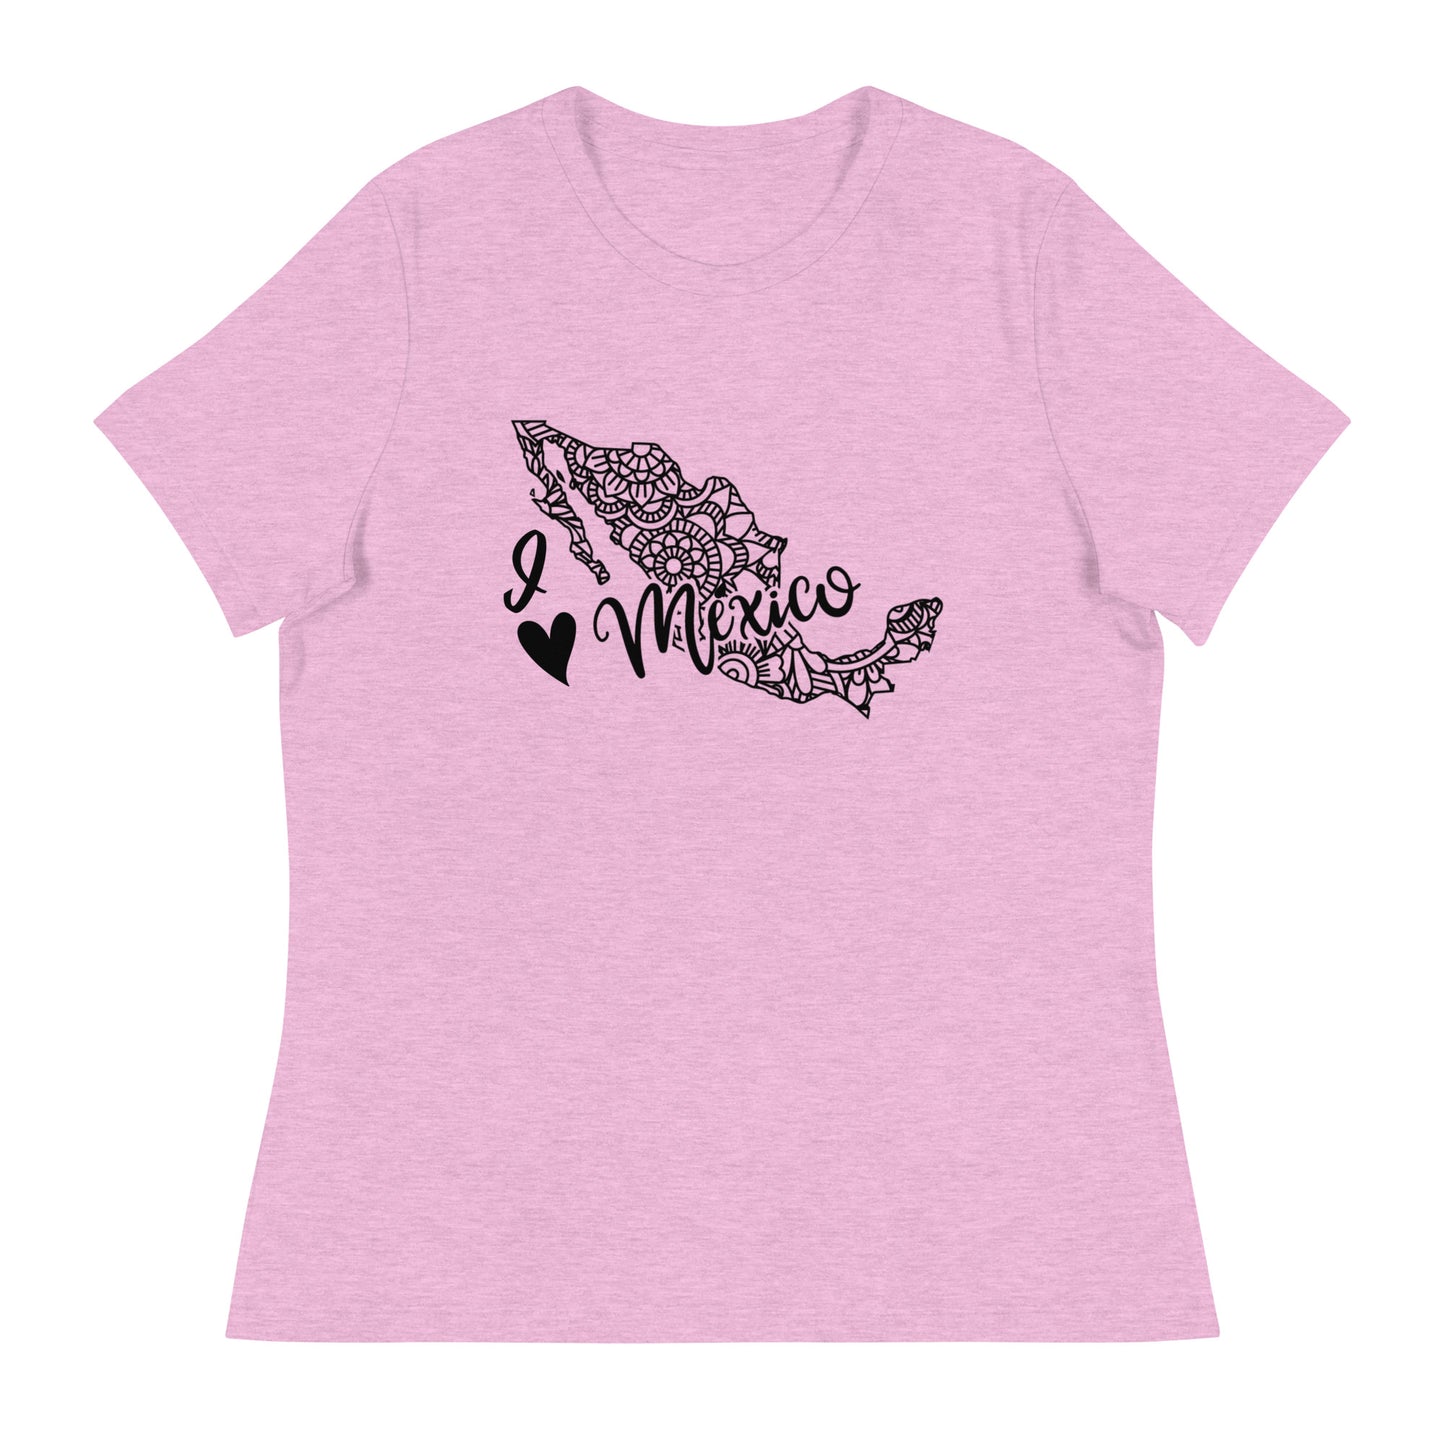 "I Love Mexico" Women's Relaxed T-Shirt